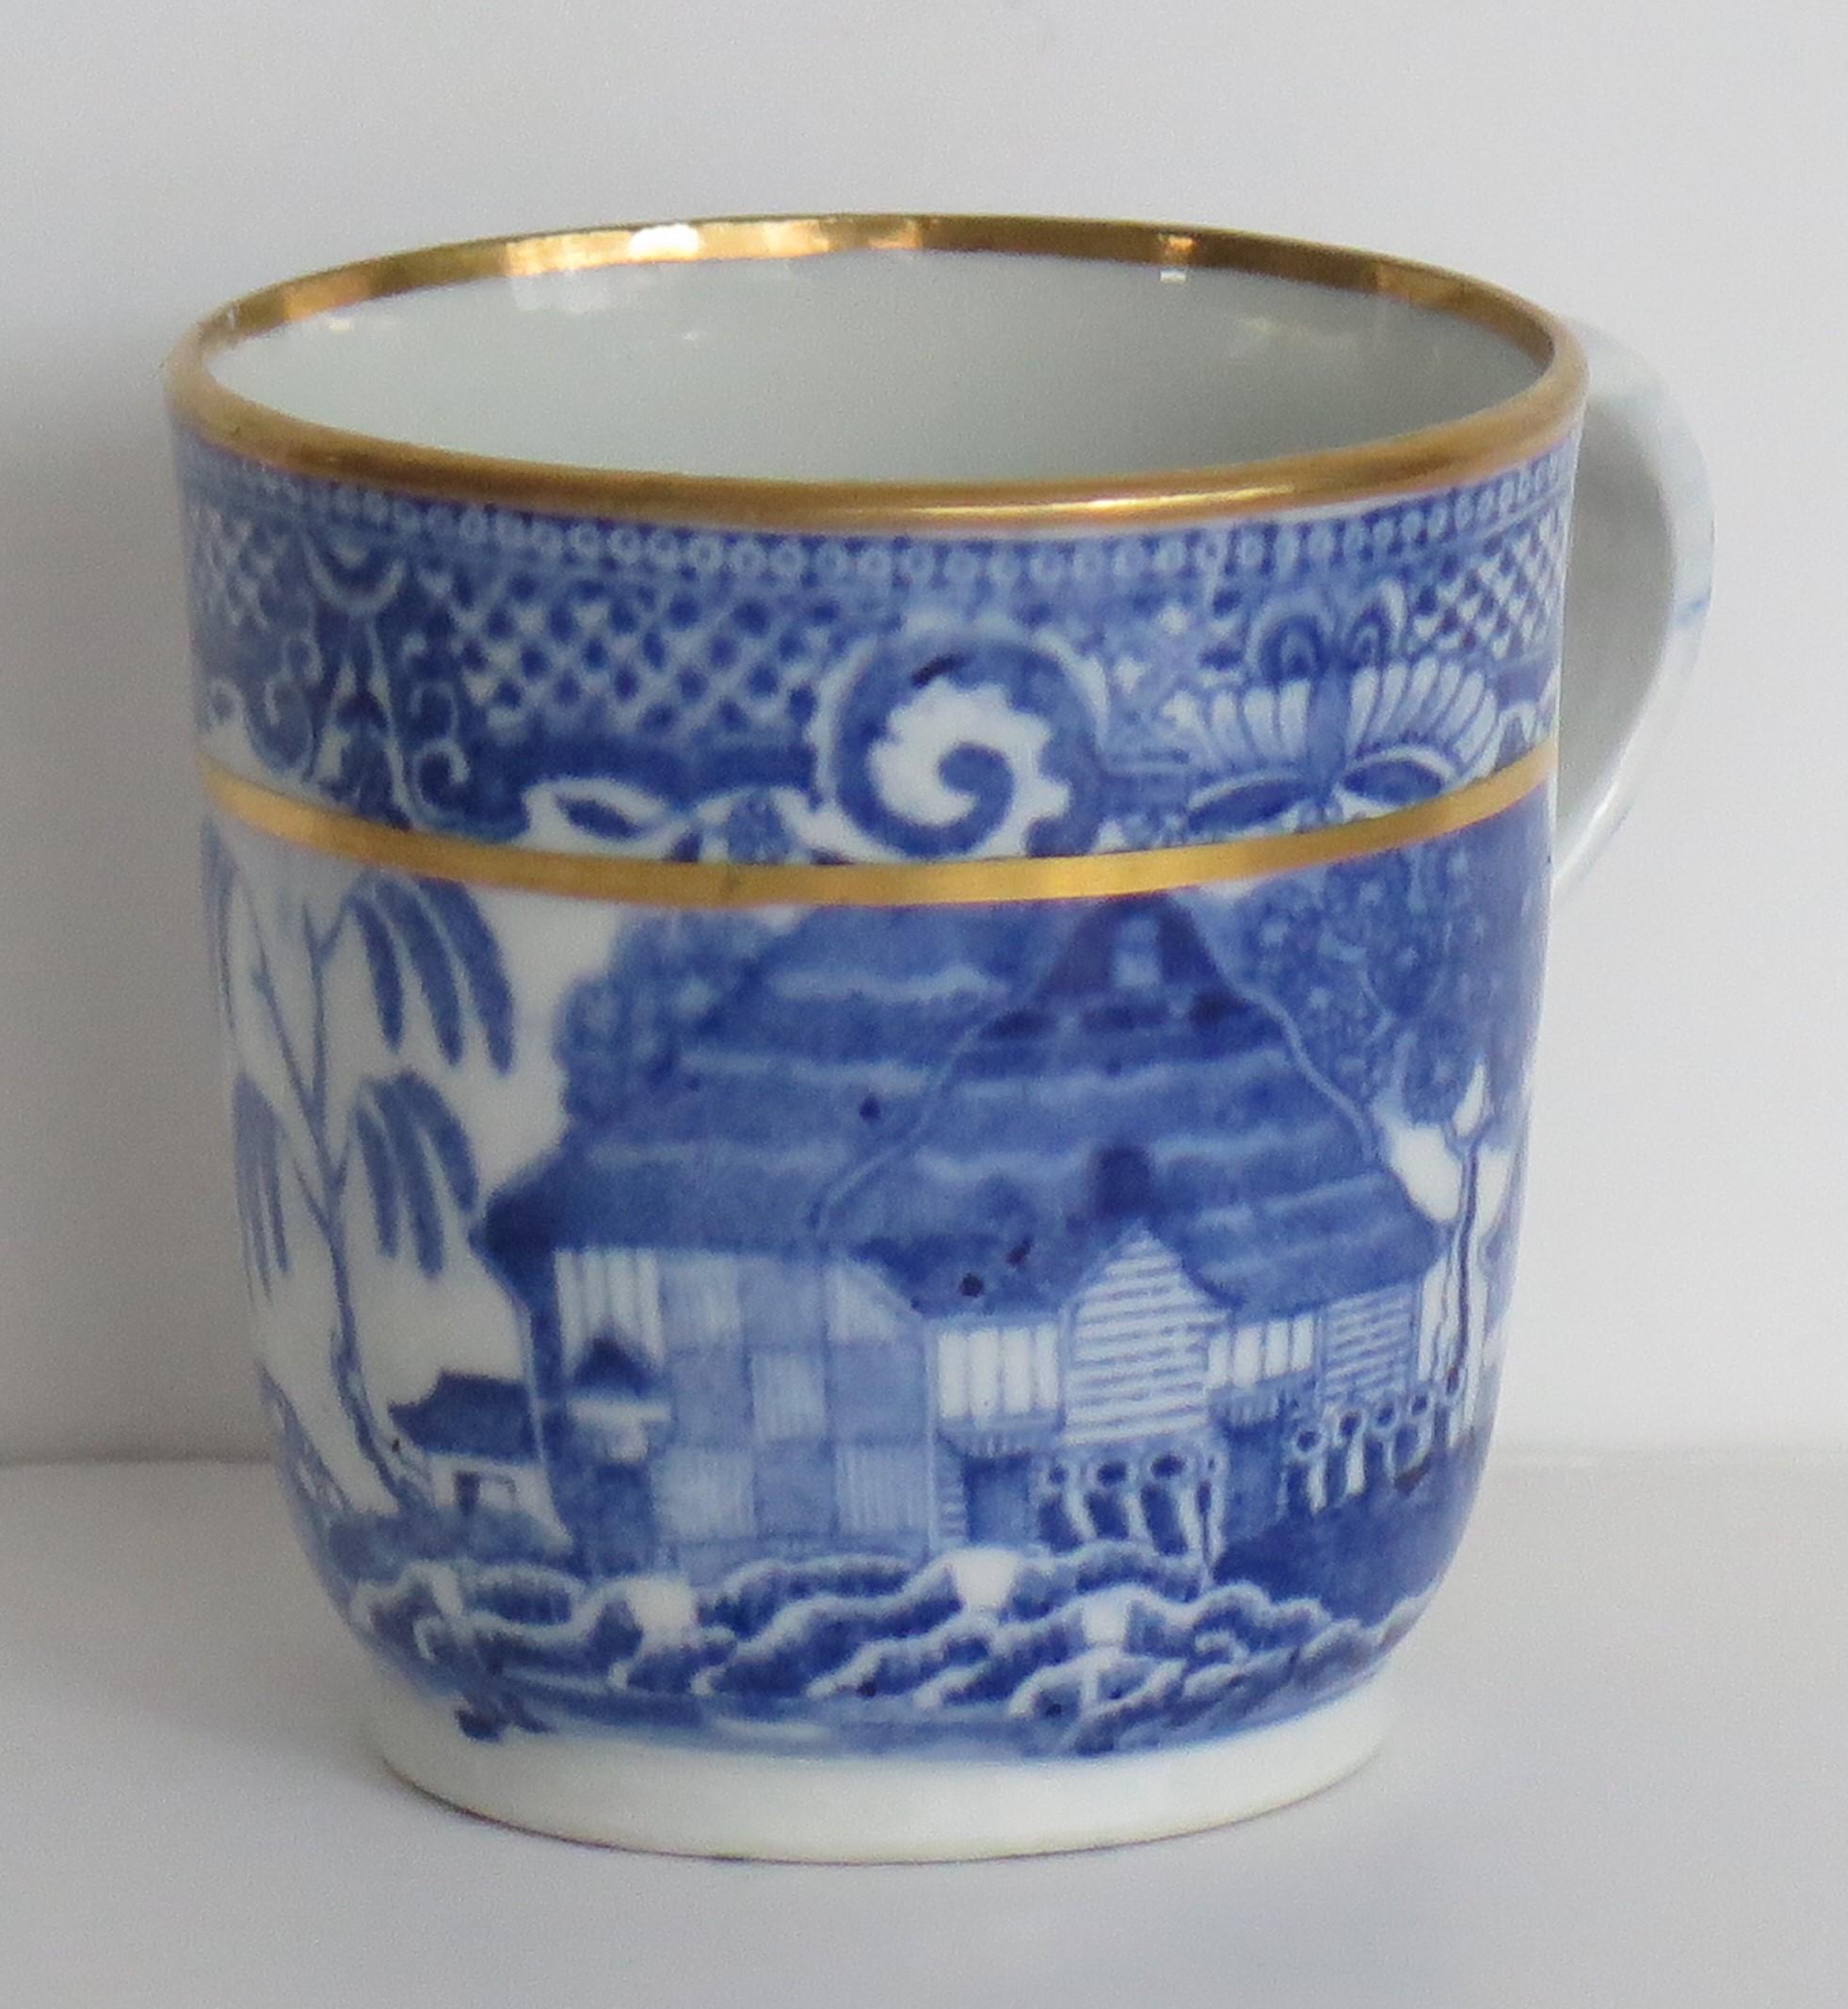 Newhall Porcelain Coffee Can Blue willow printed Ptn Ca 1805 1